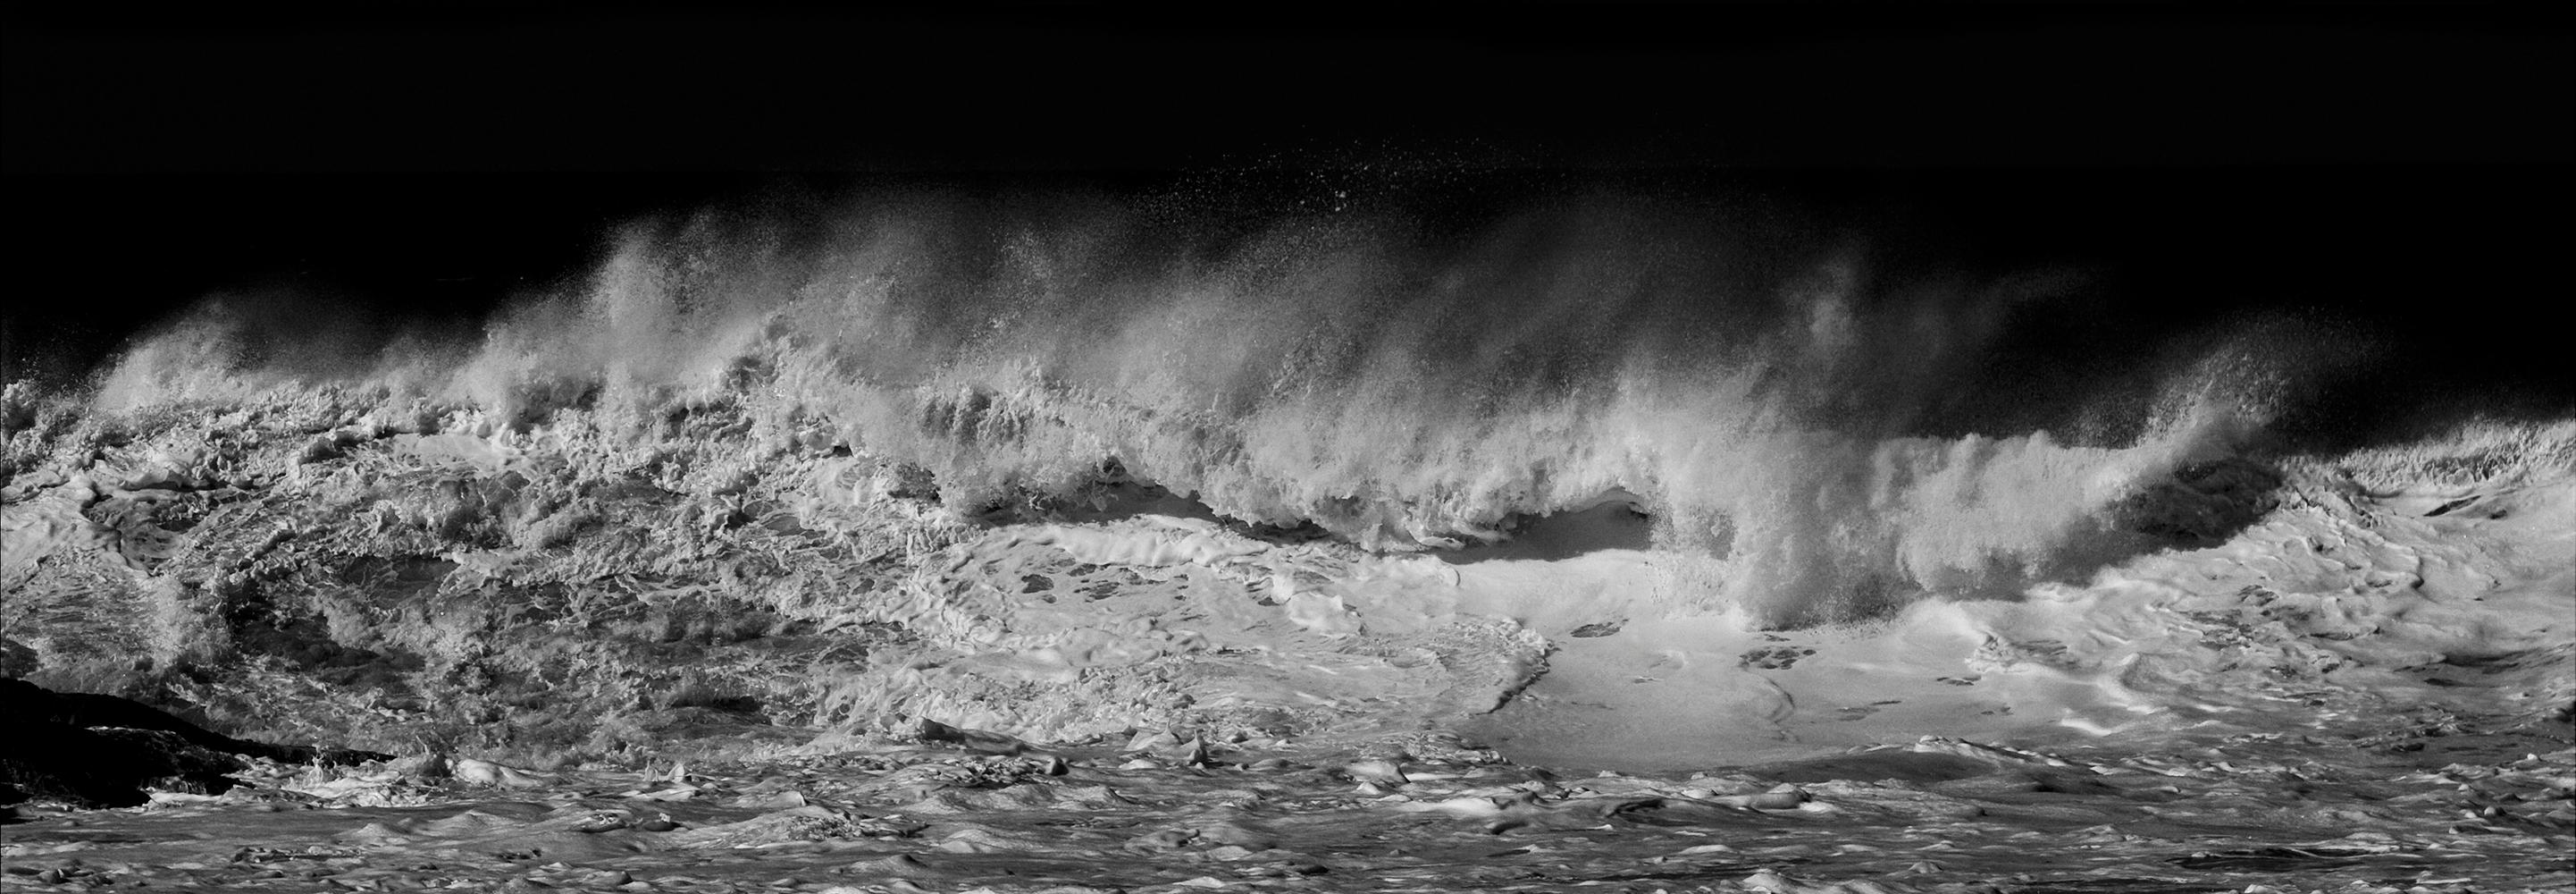 Photography by Brazilian photographer Roberta Borges. The waves perception, which derive from the strong influence of her background as a professional surfer (she was the first Brazilian champion in 1985), acquire empowerment and expression through